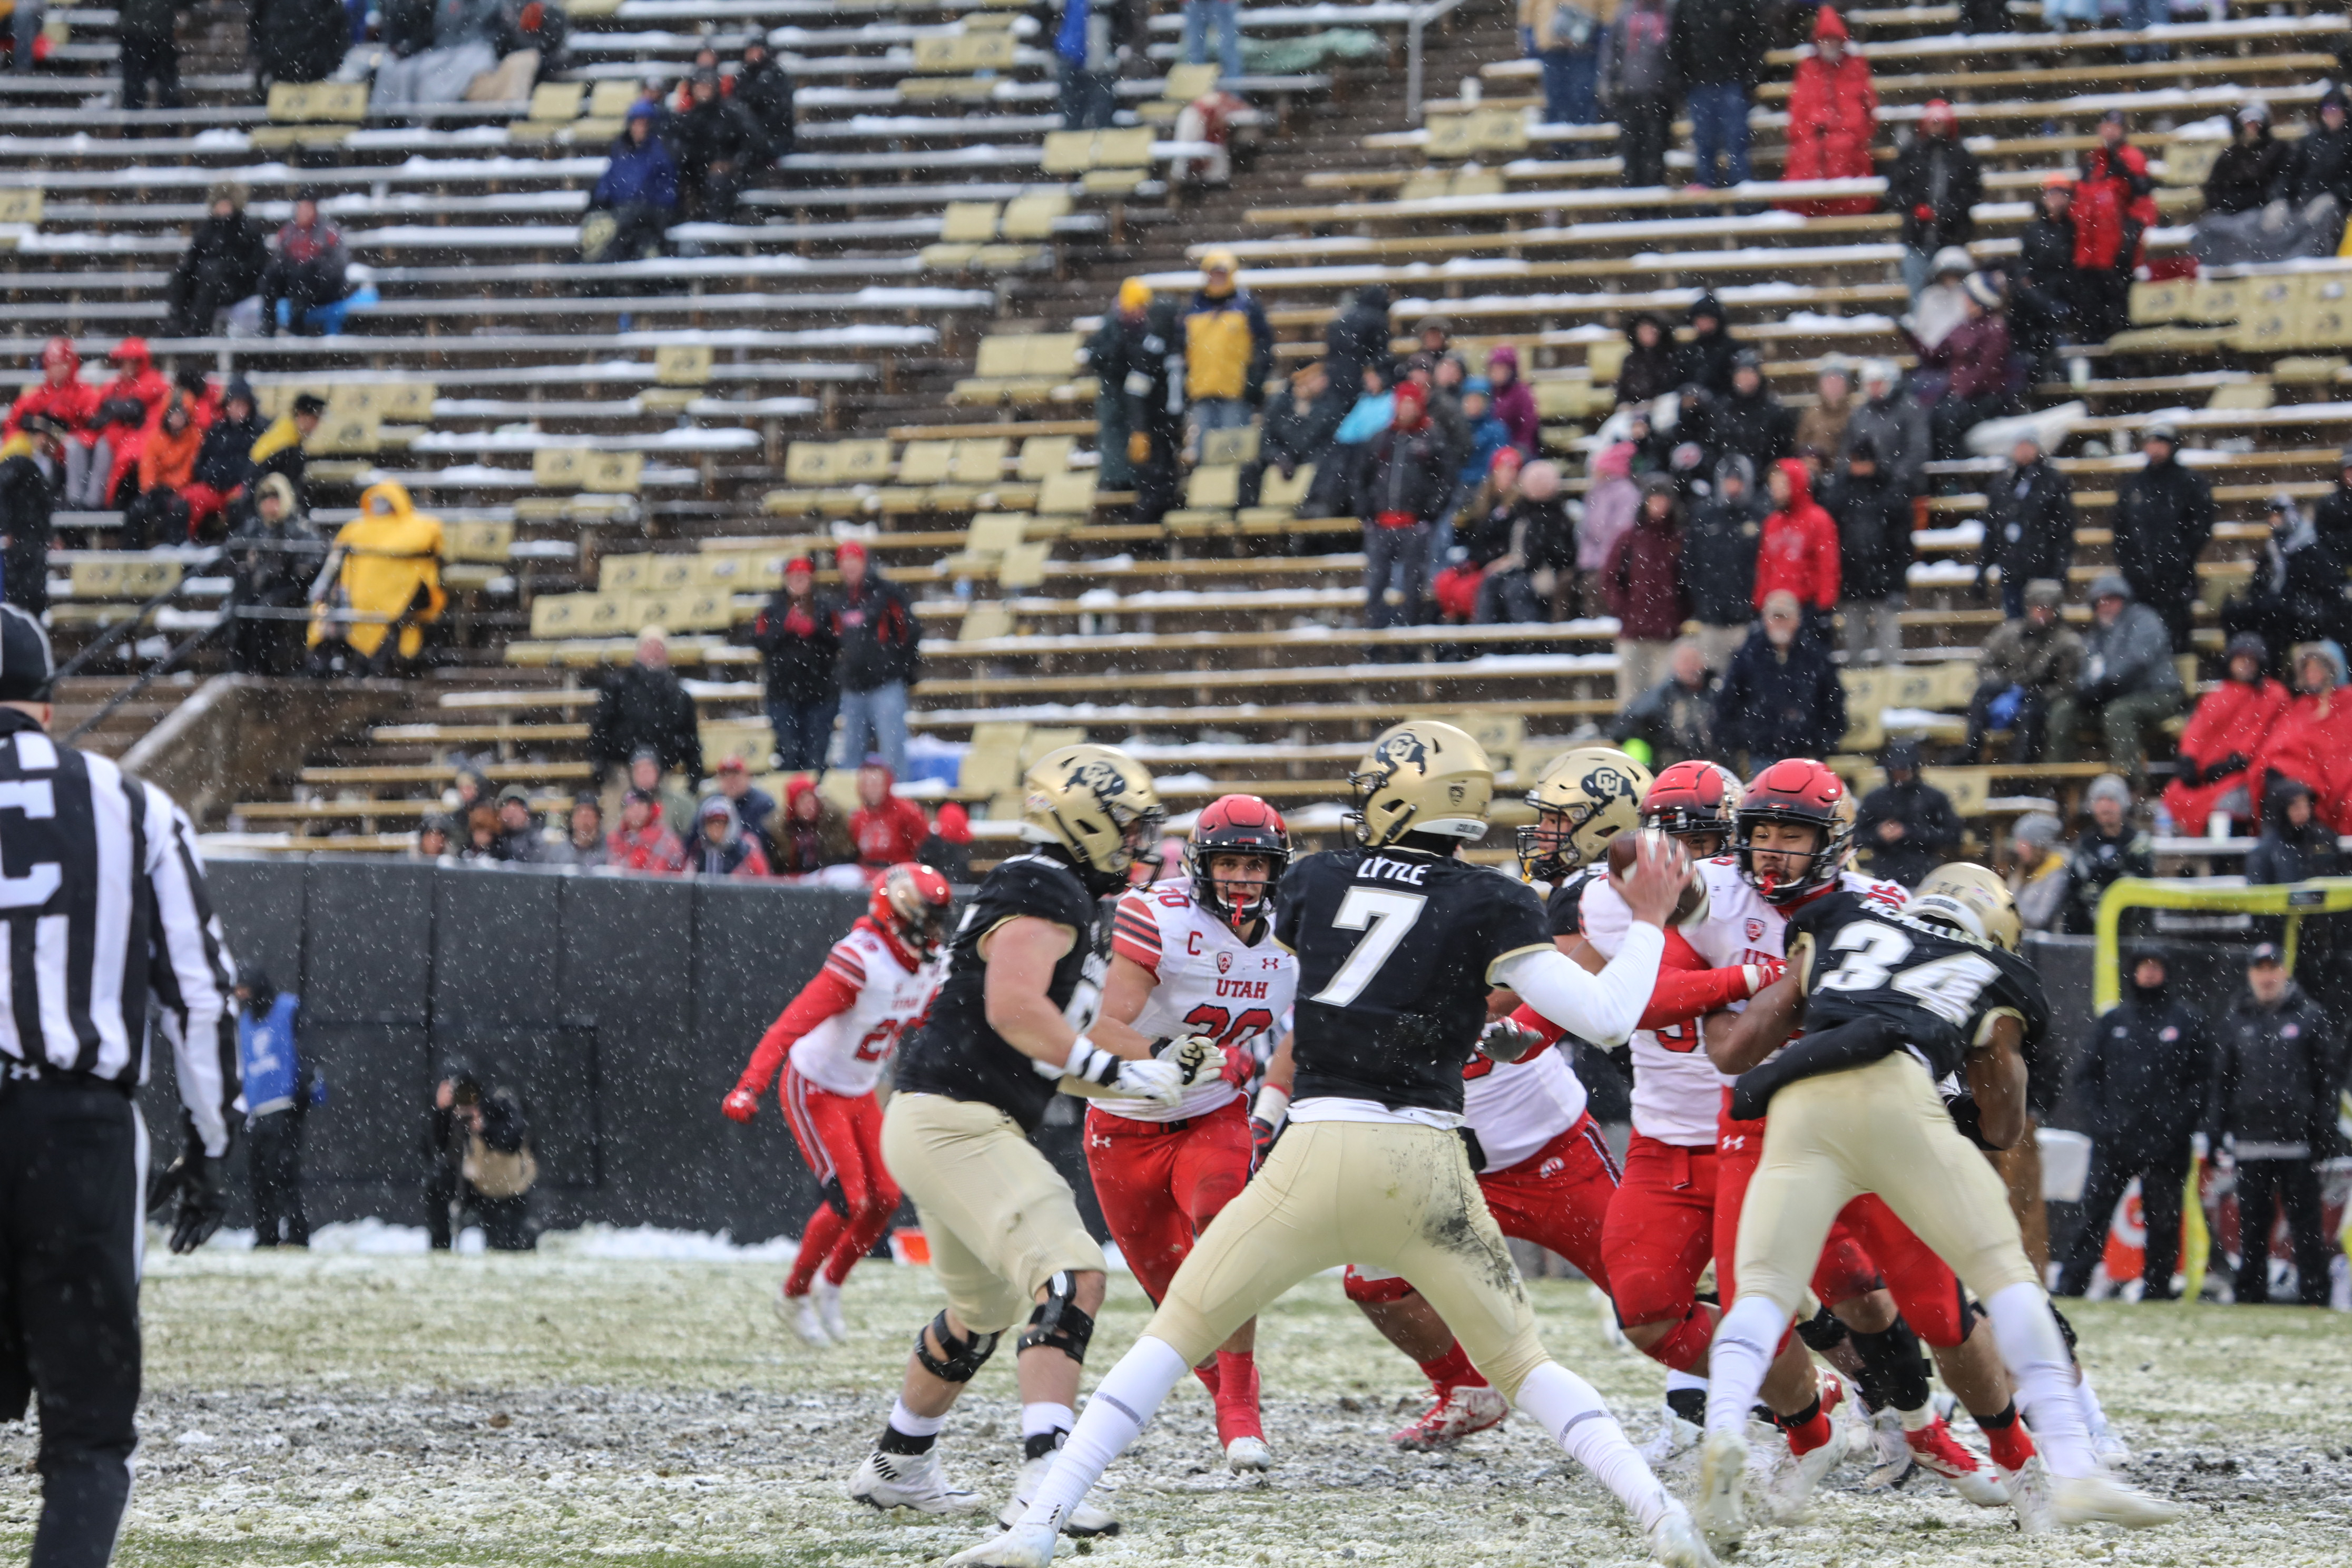 Buffs let another one slip away, fall to No. 19 Utah 30-7 on Senior Day